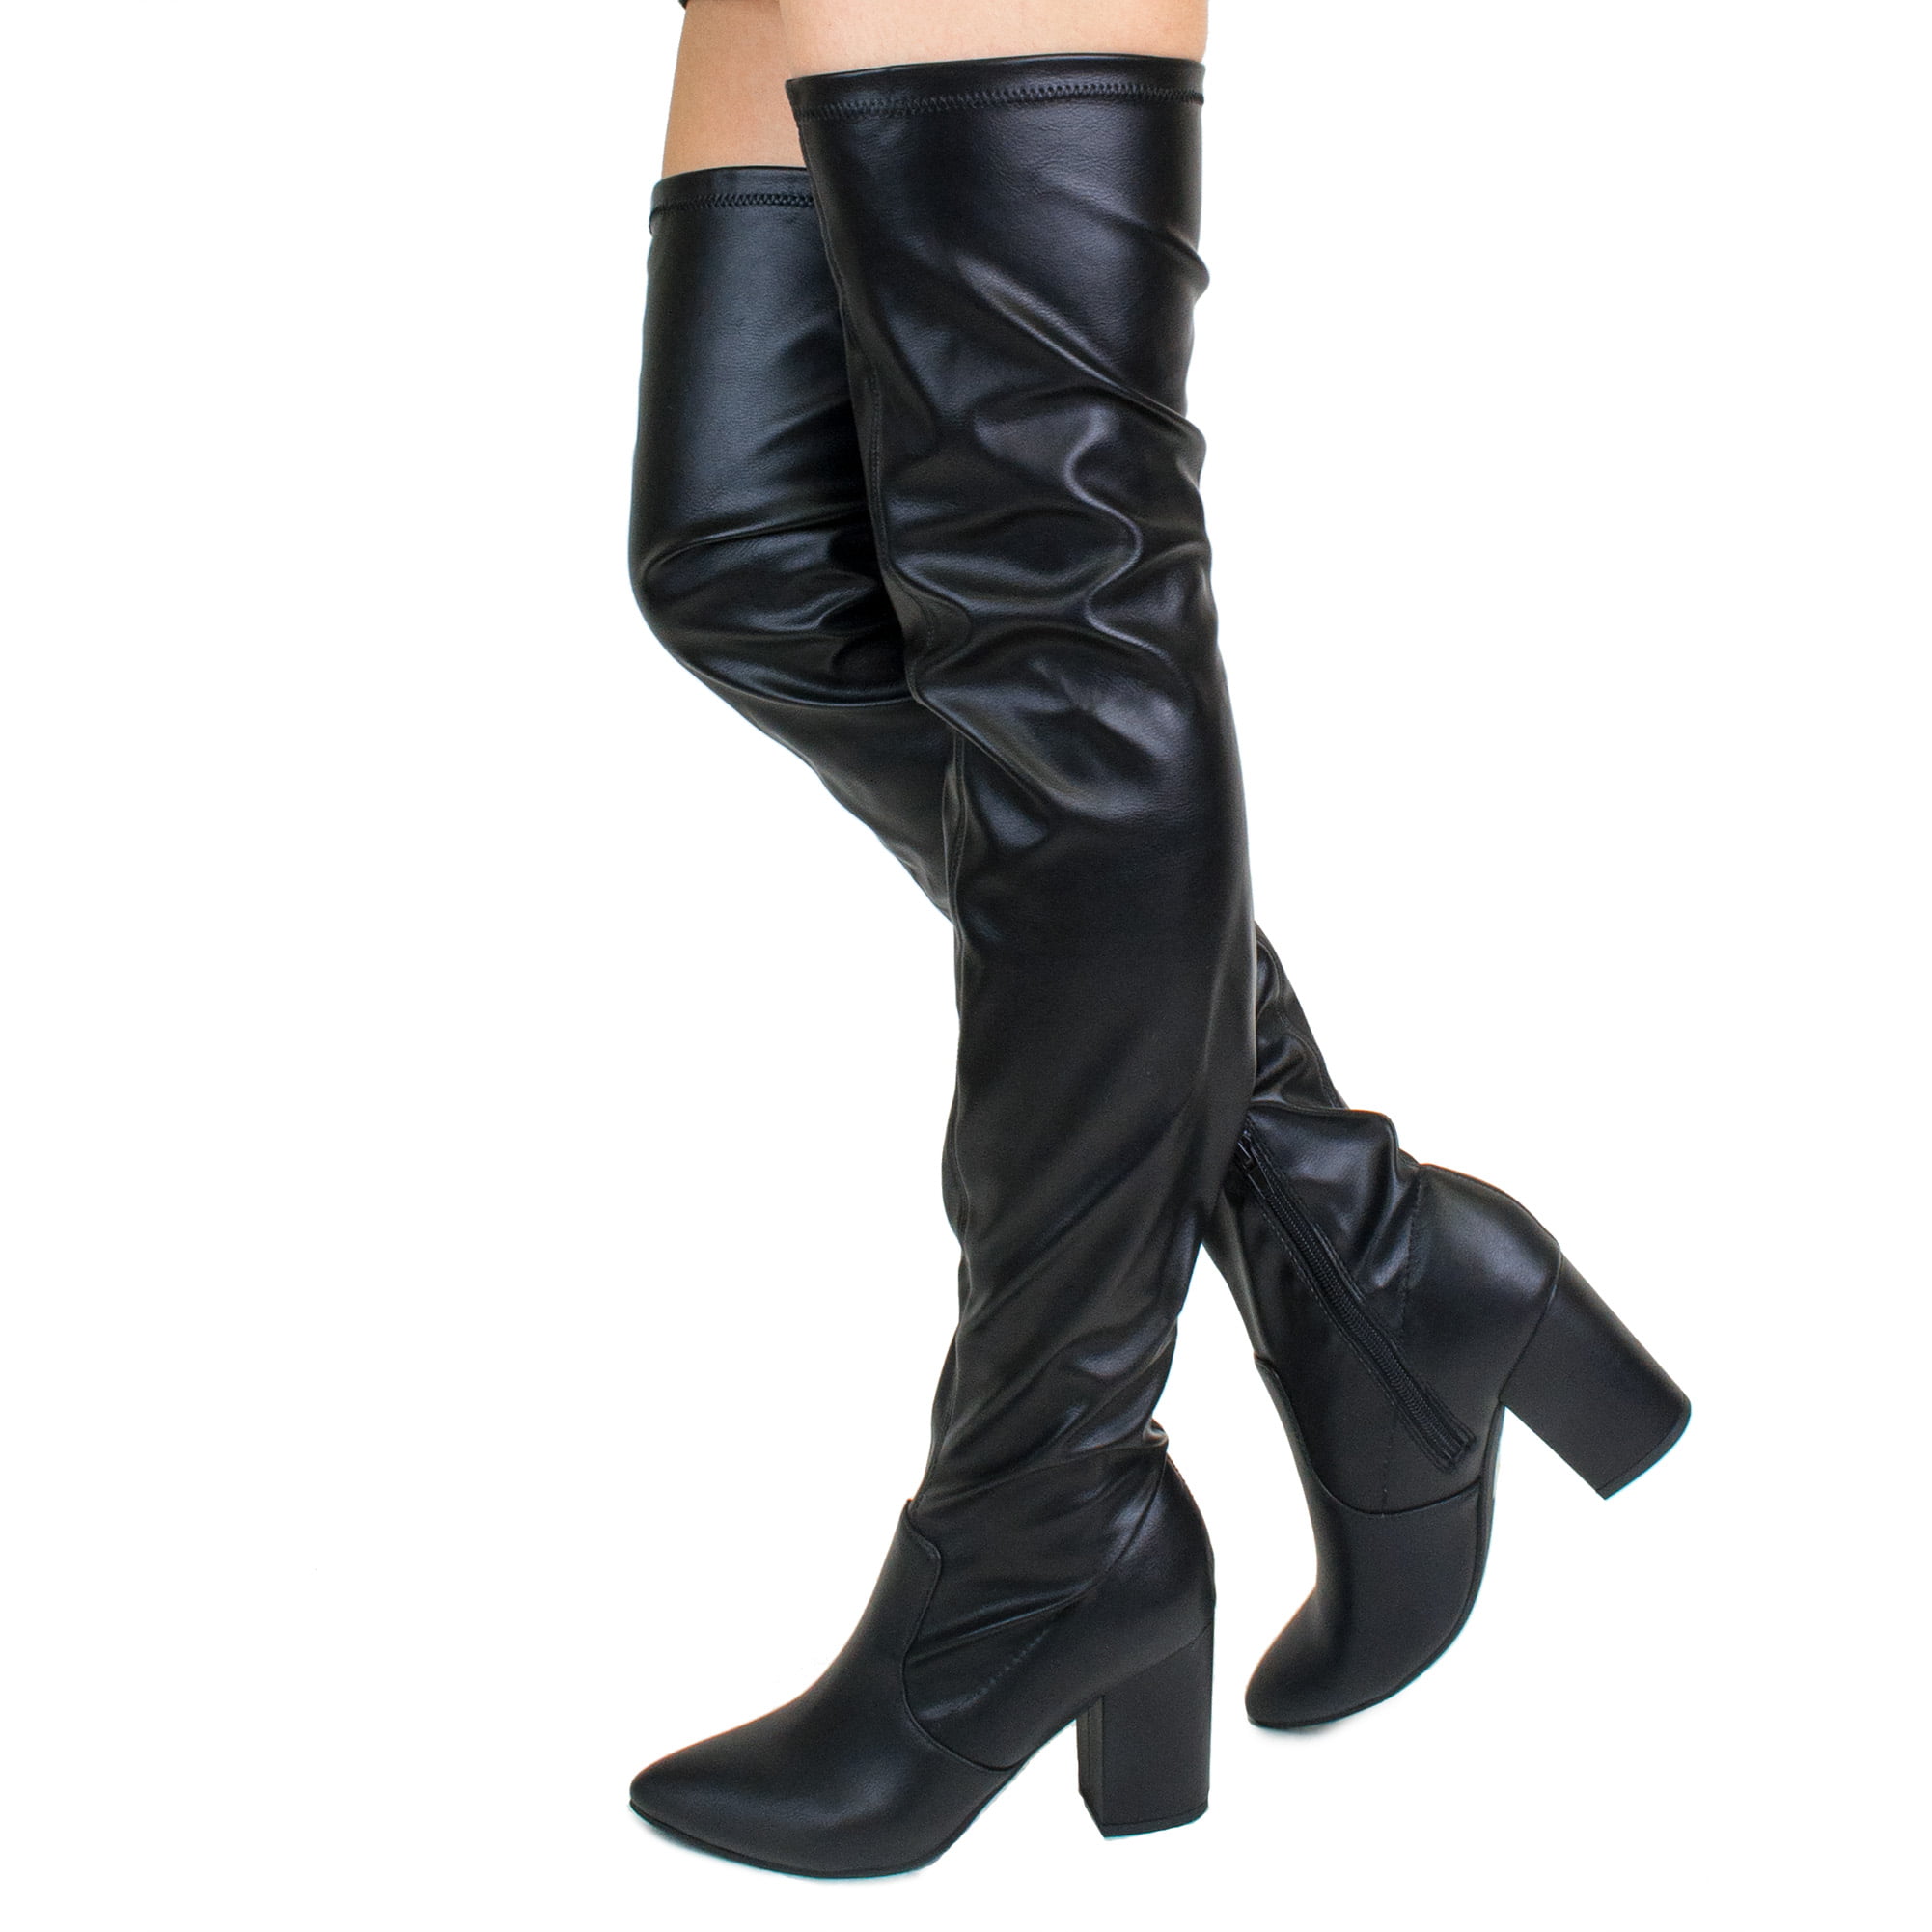 Women Black Side Zipper Genuine Leather Shoes Over the Knee Thigh High Boots New 